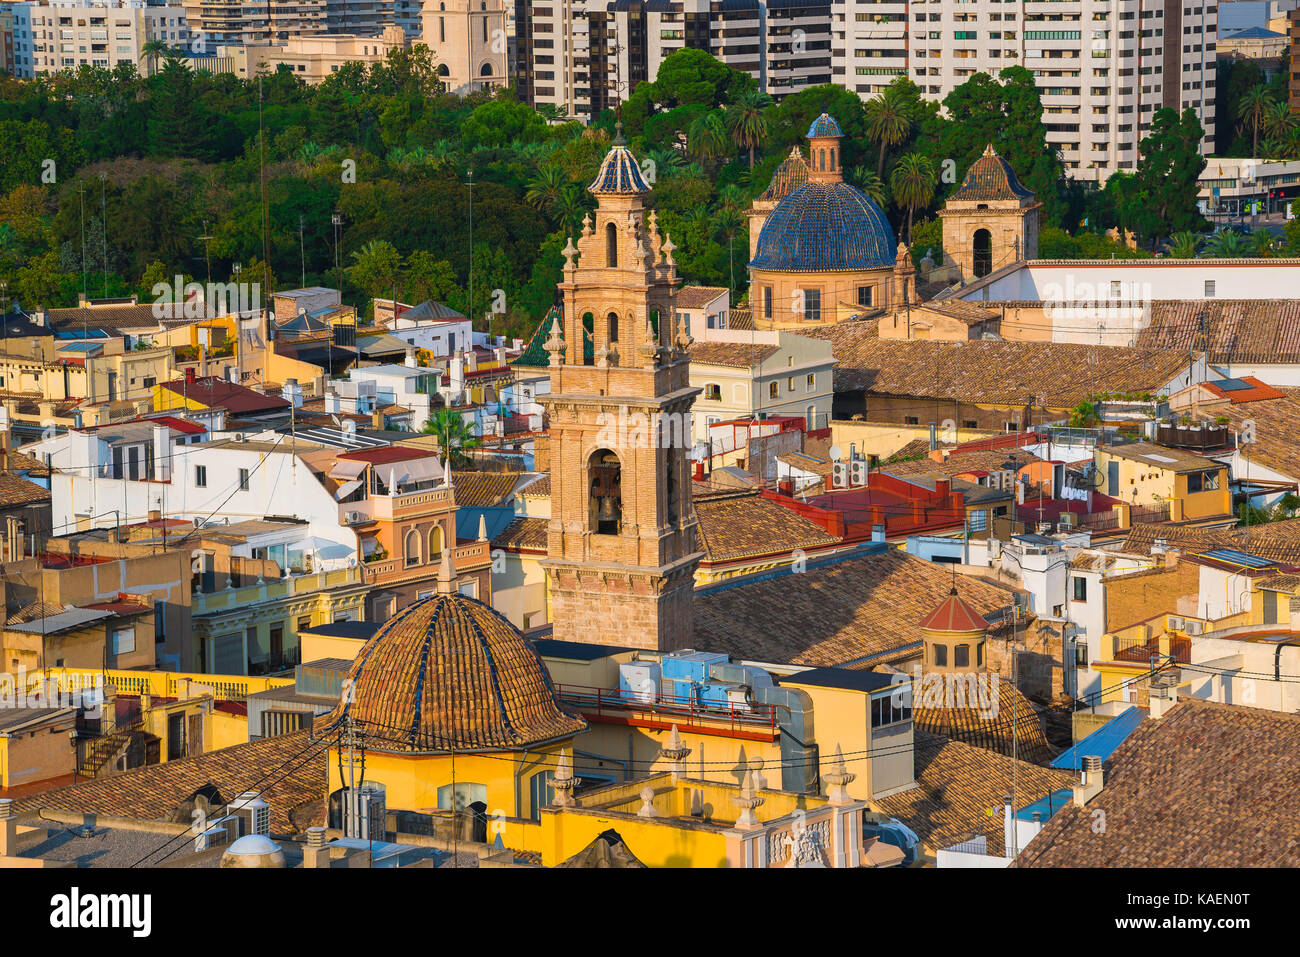 Valencia city view, aerial view of the centre of Valencia showing the rooftops and church domes of the Barrio del Carmen historic old town area, Spain Stock Photo